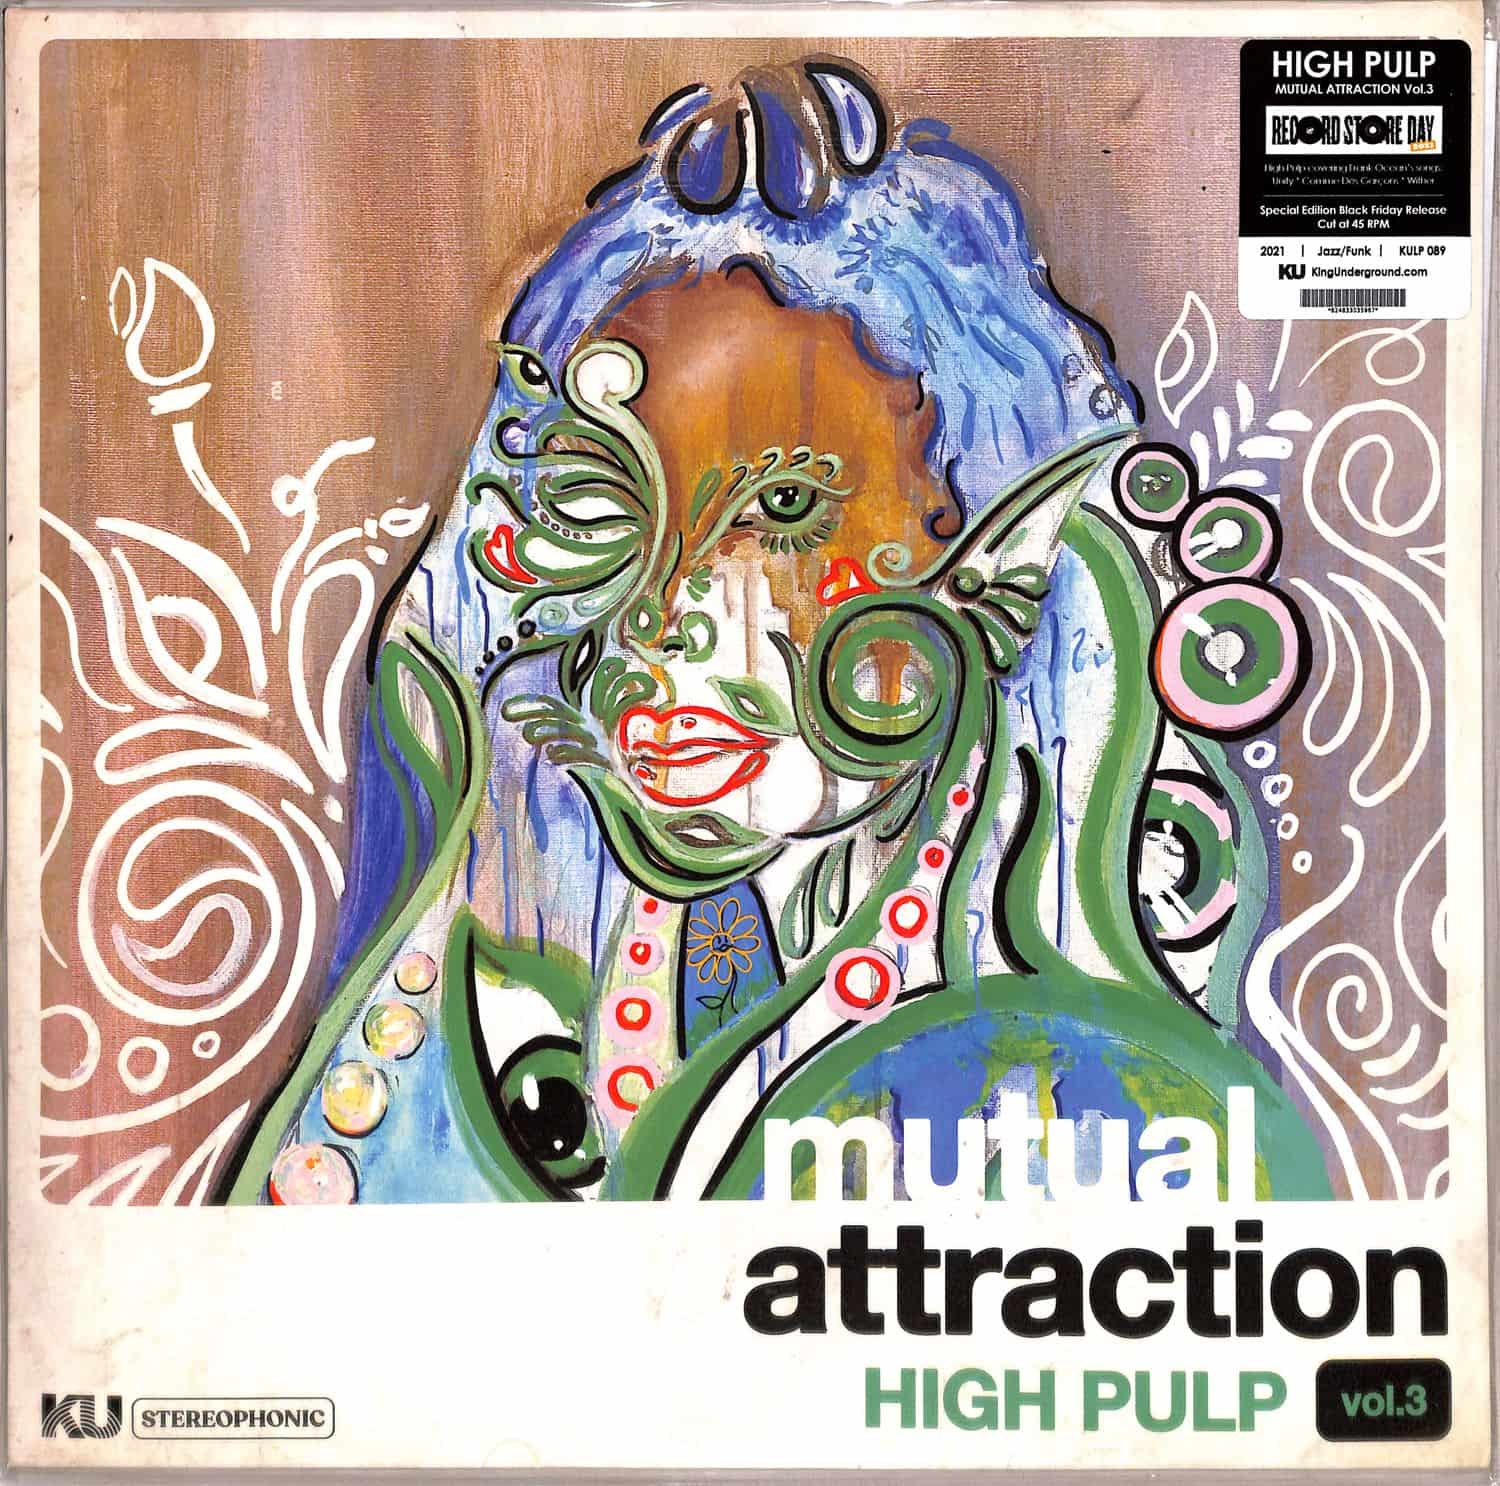 High Pulp - MUTUAL ATTRACTION VOL. 3 